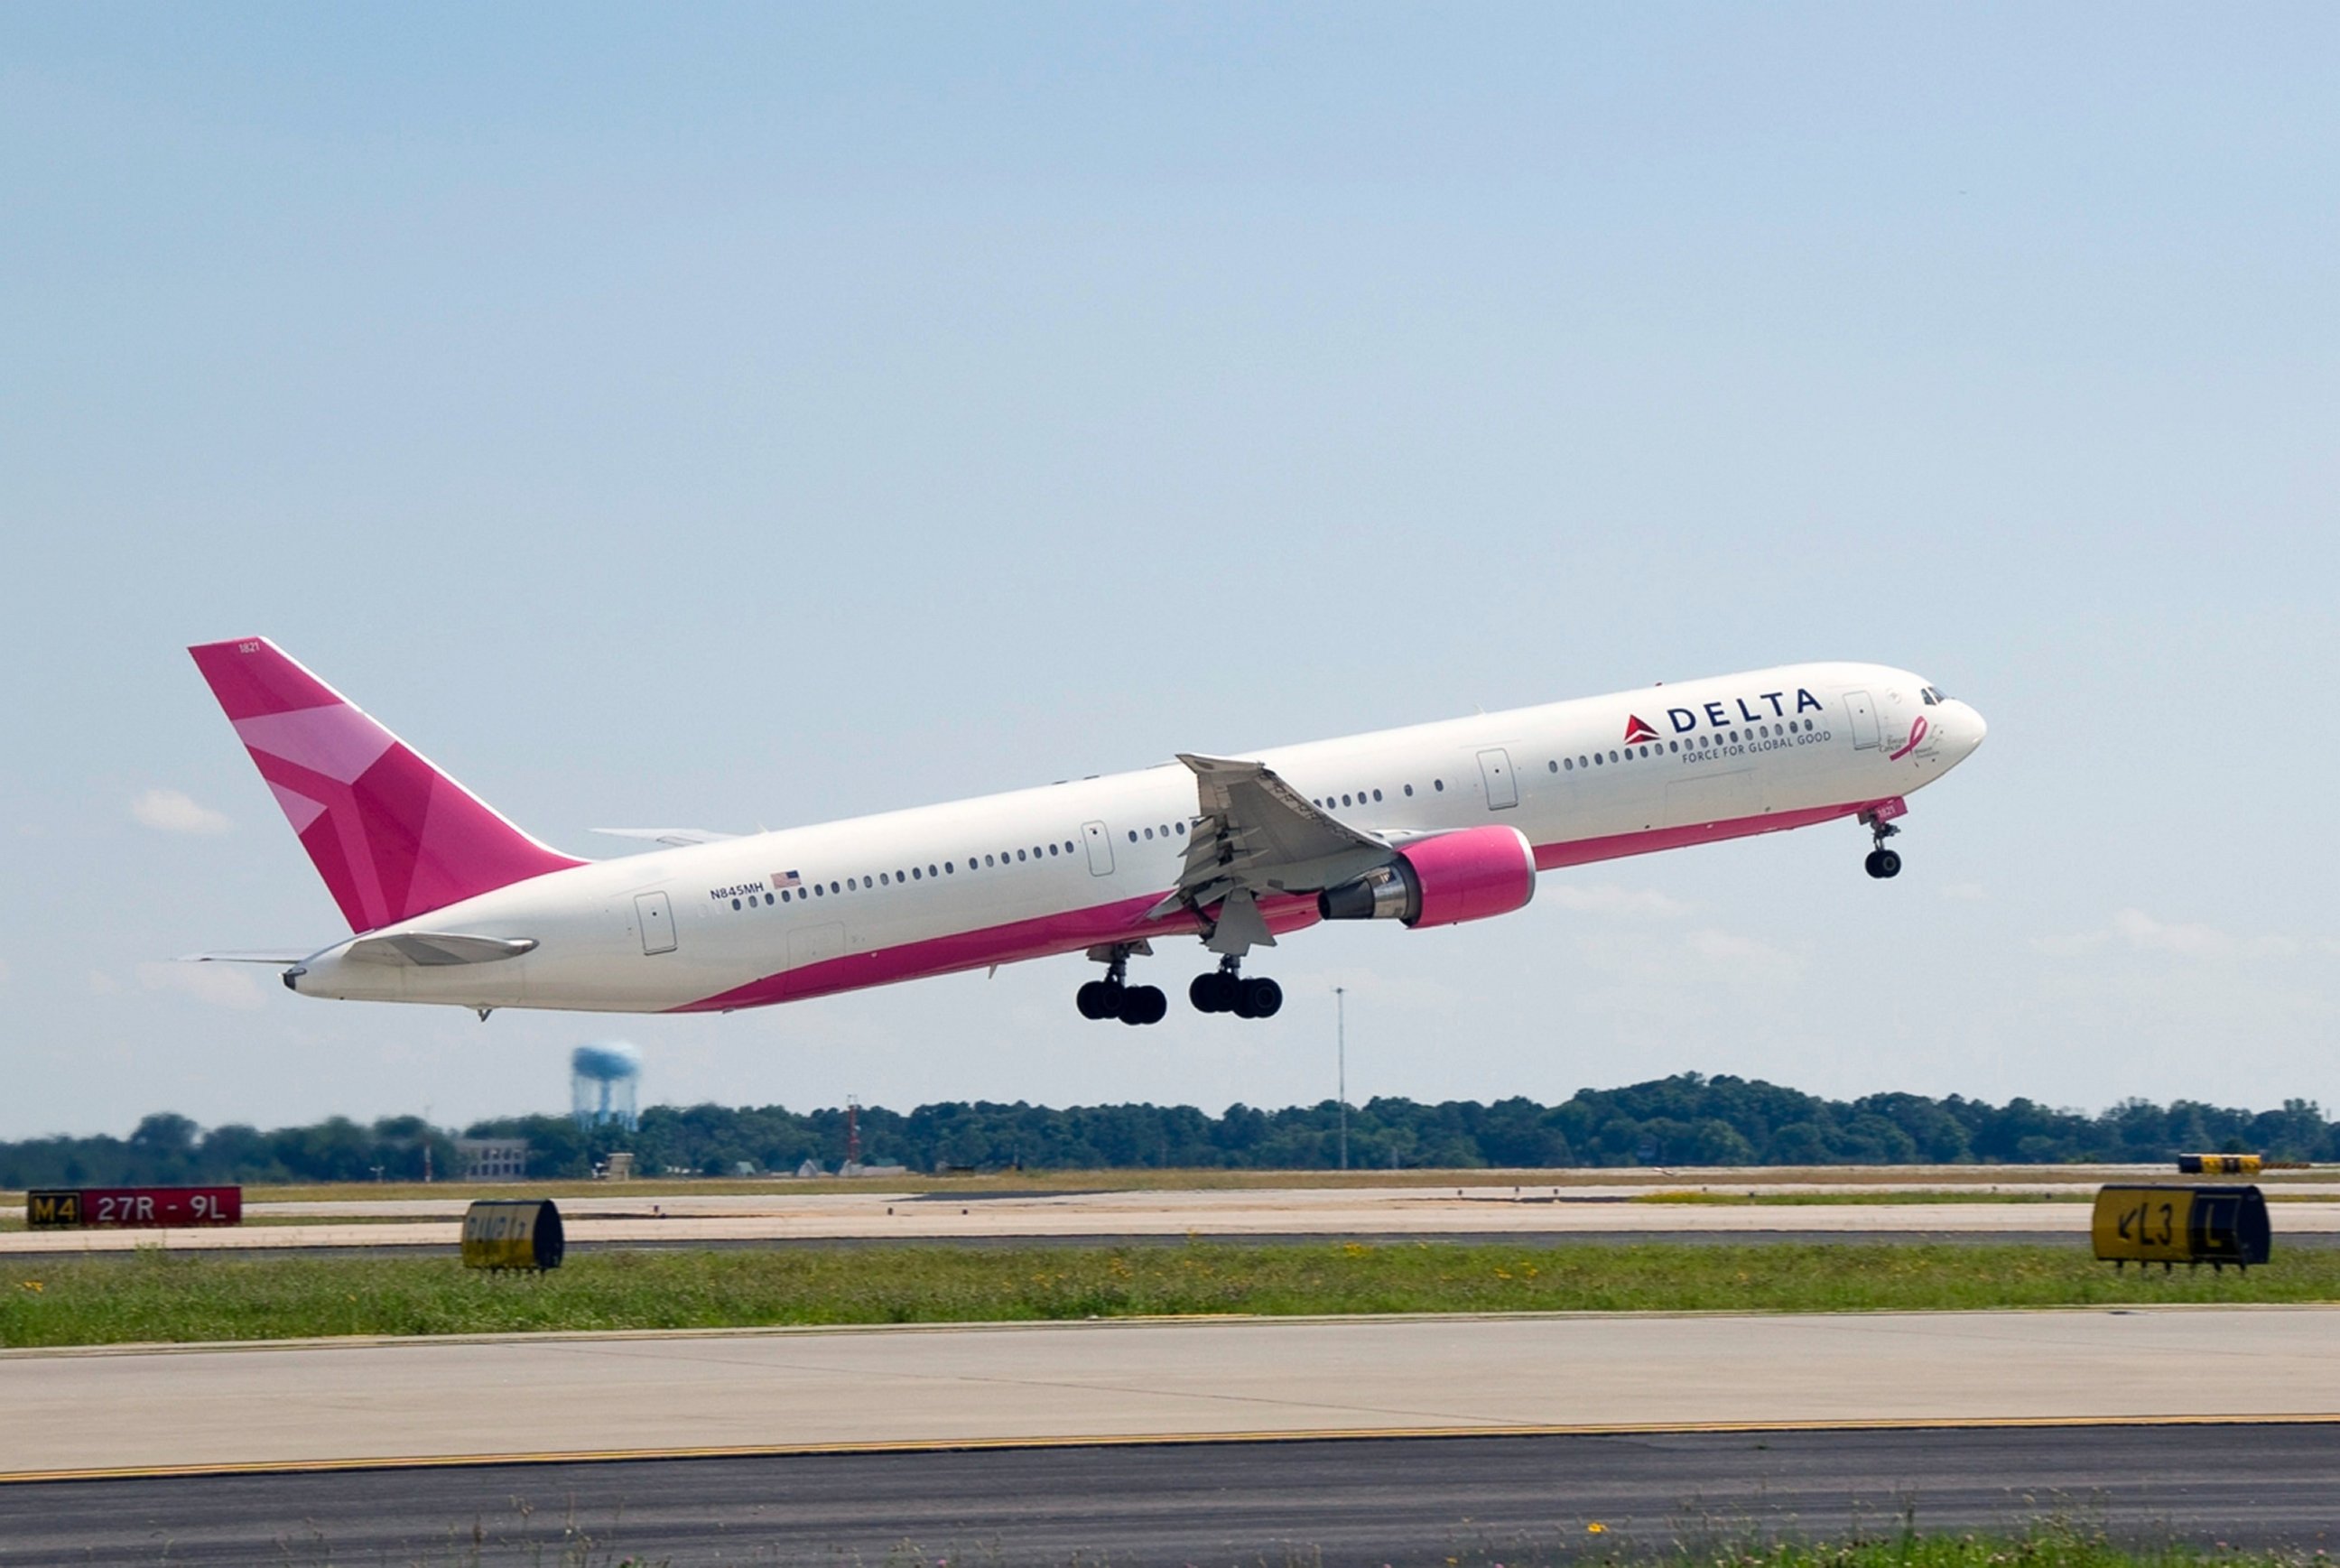 PHOTO: Delta Airlines paints an aircraft pink in honor of Breast Cancer Awareness Month.